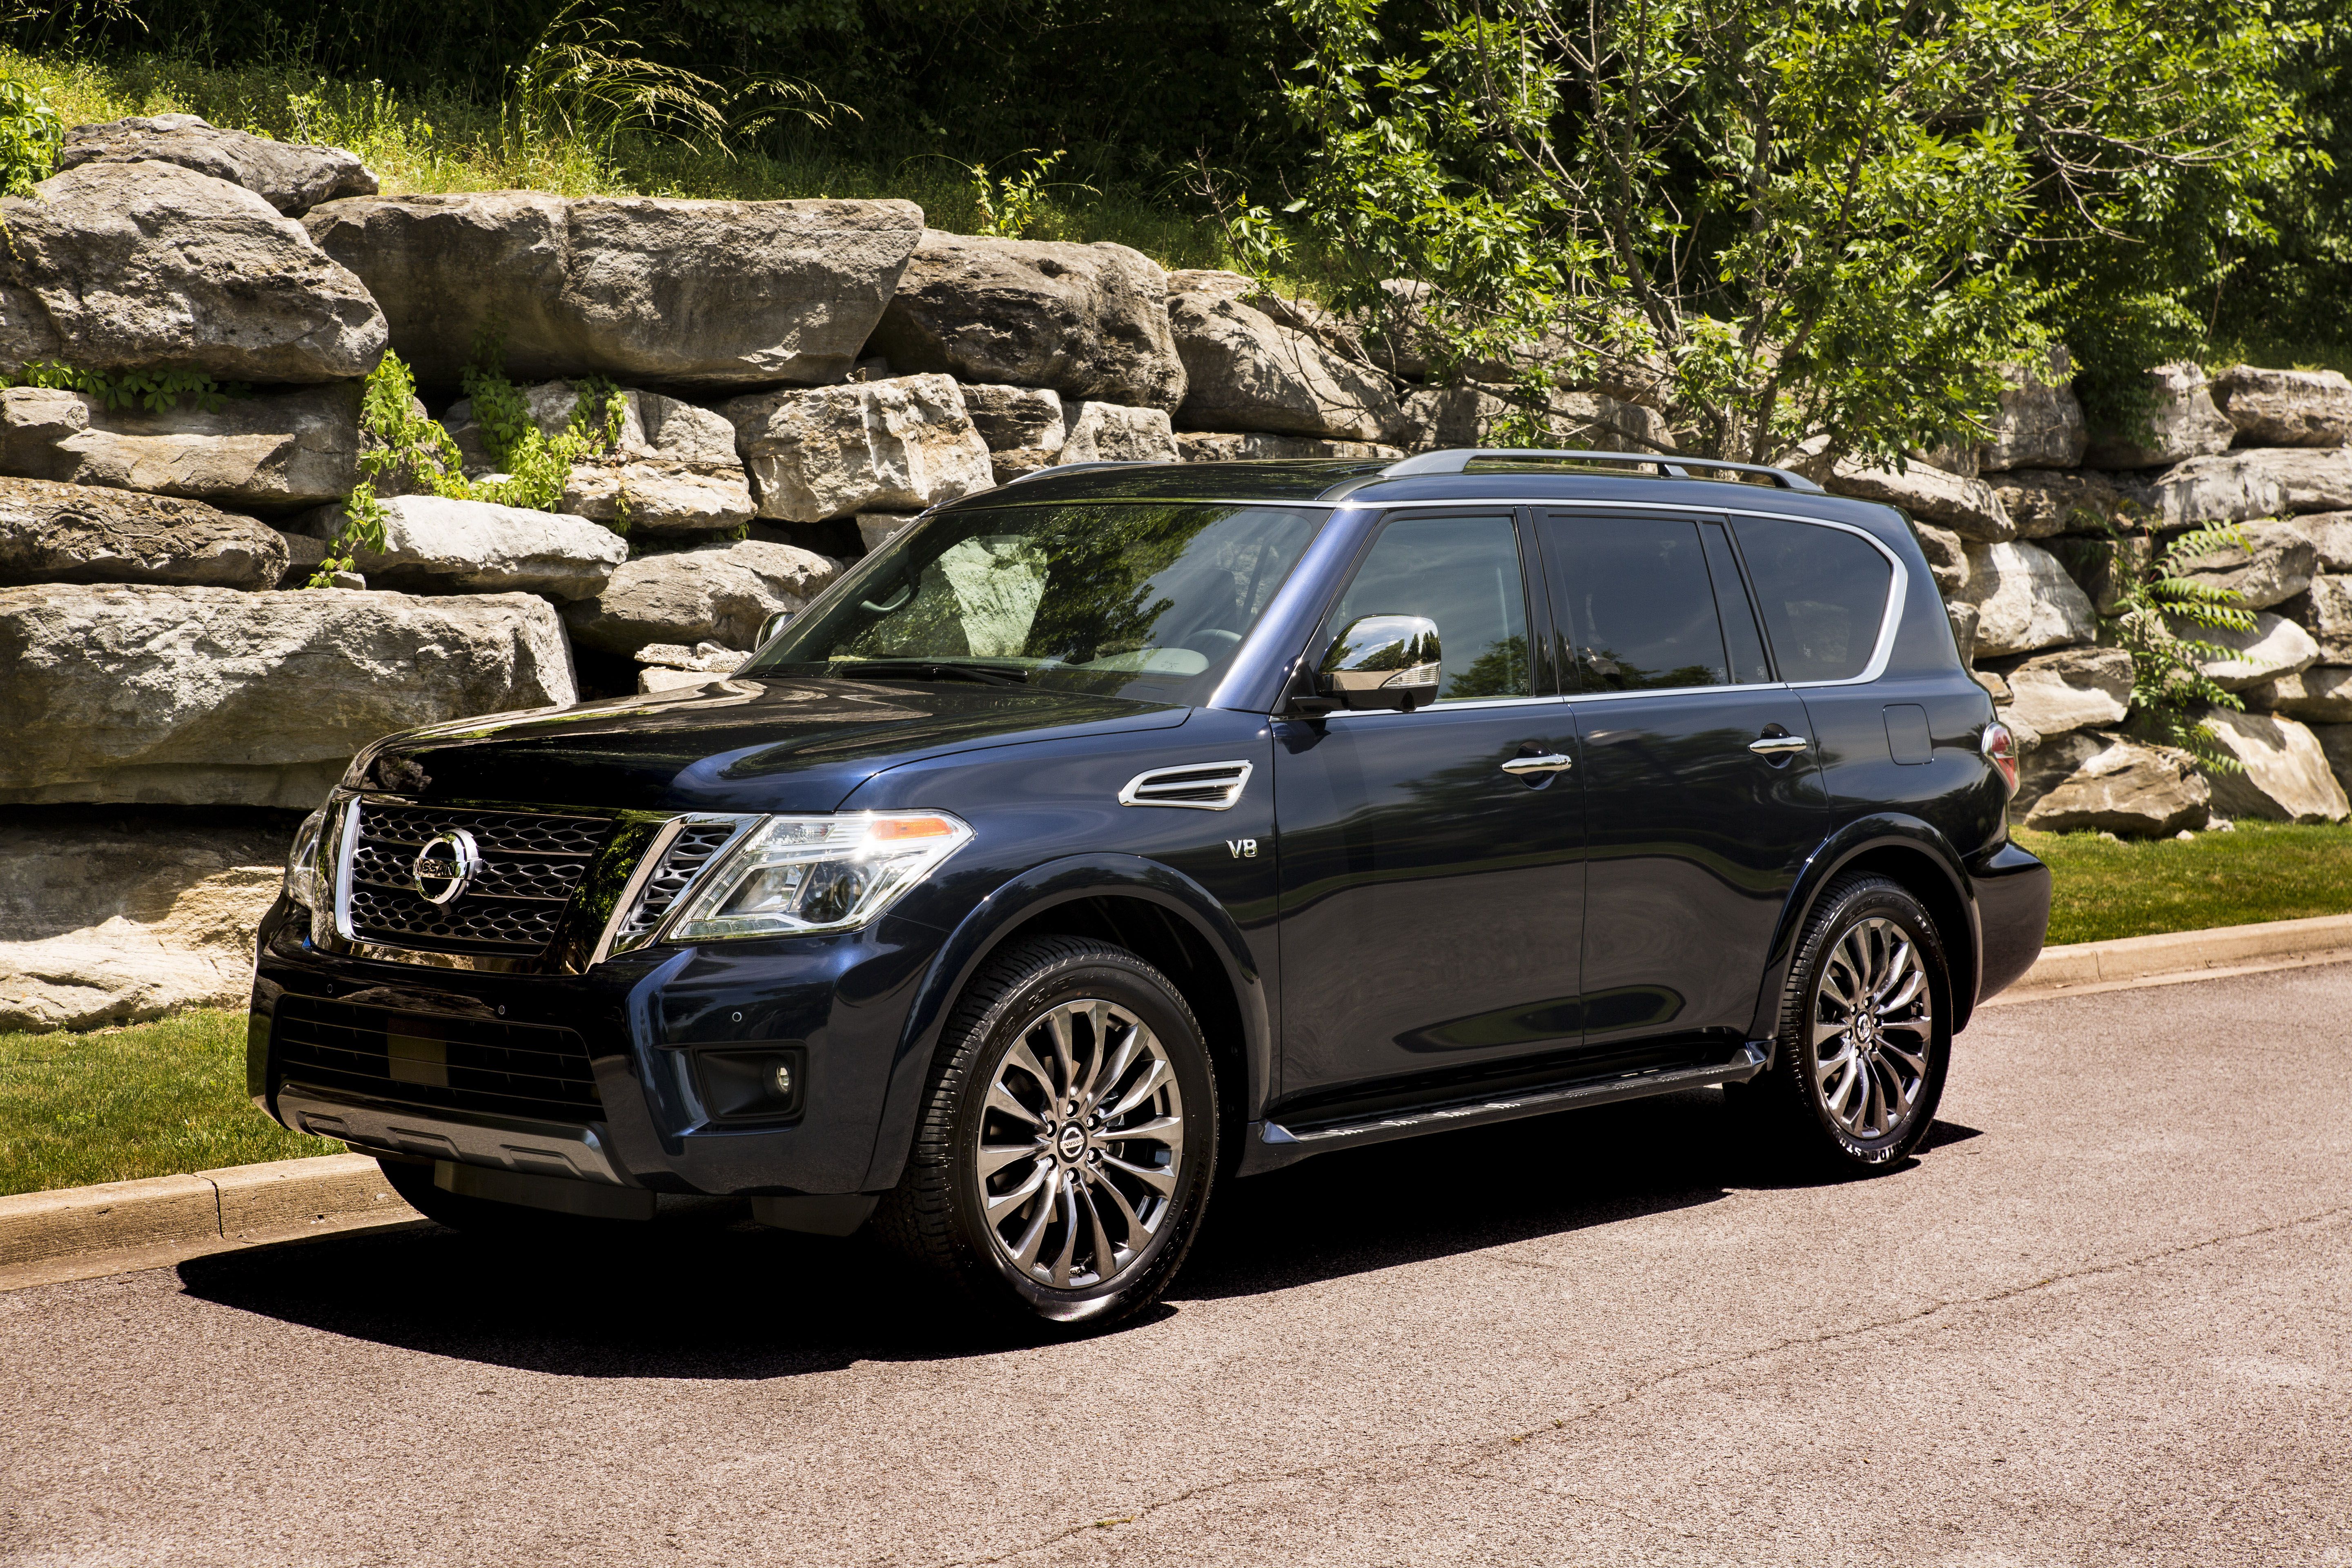 2020 Nissan Armada Review, Pricing, and Specs